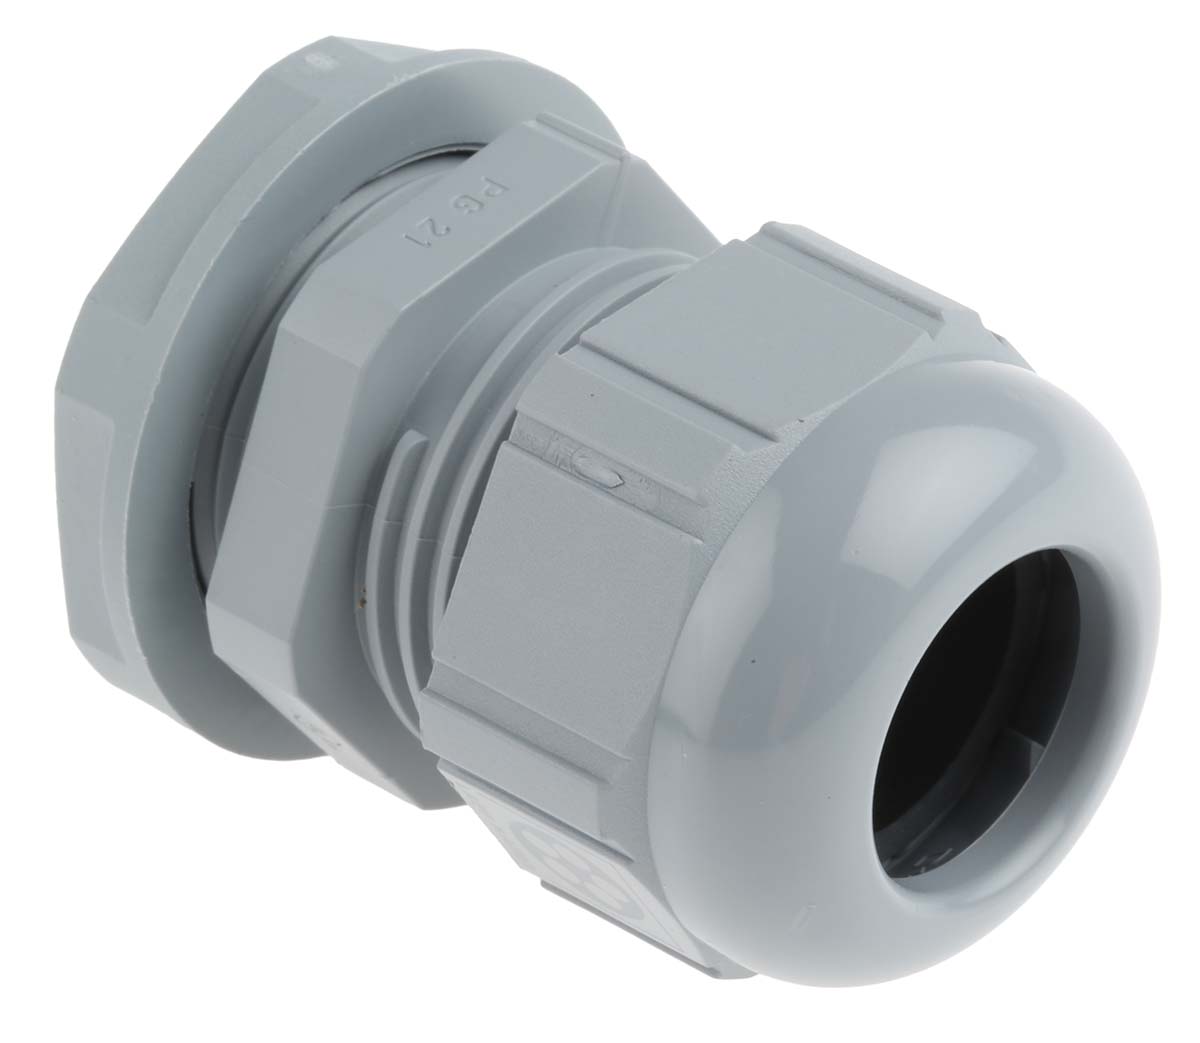 Lapp SKINTOP Series Grey Polyamide Cable Gland, PG21 Thread, 13mm Min, 18mm Max, IP68